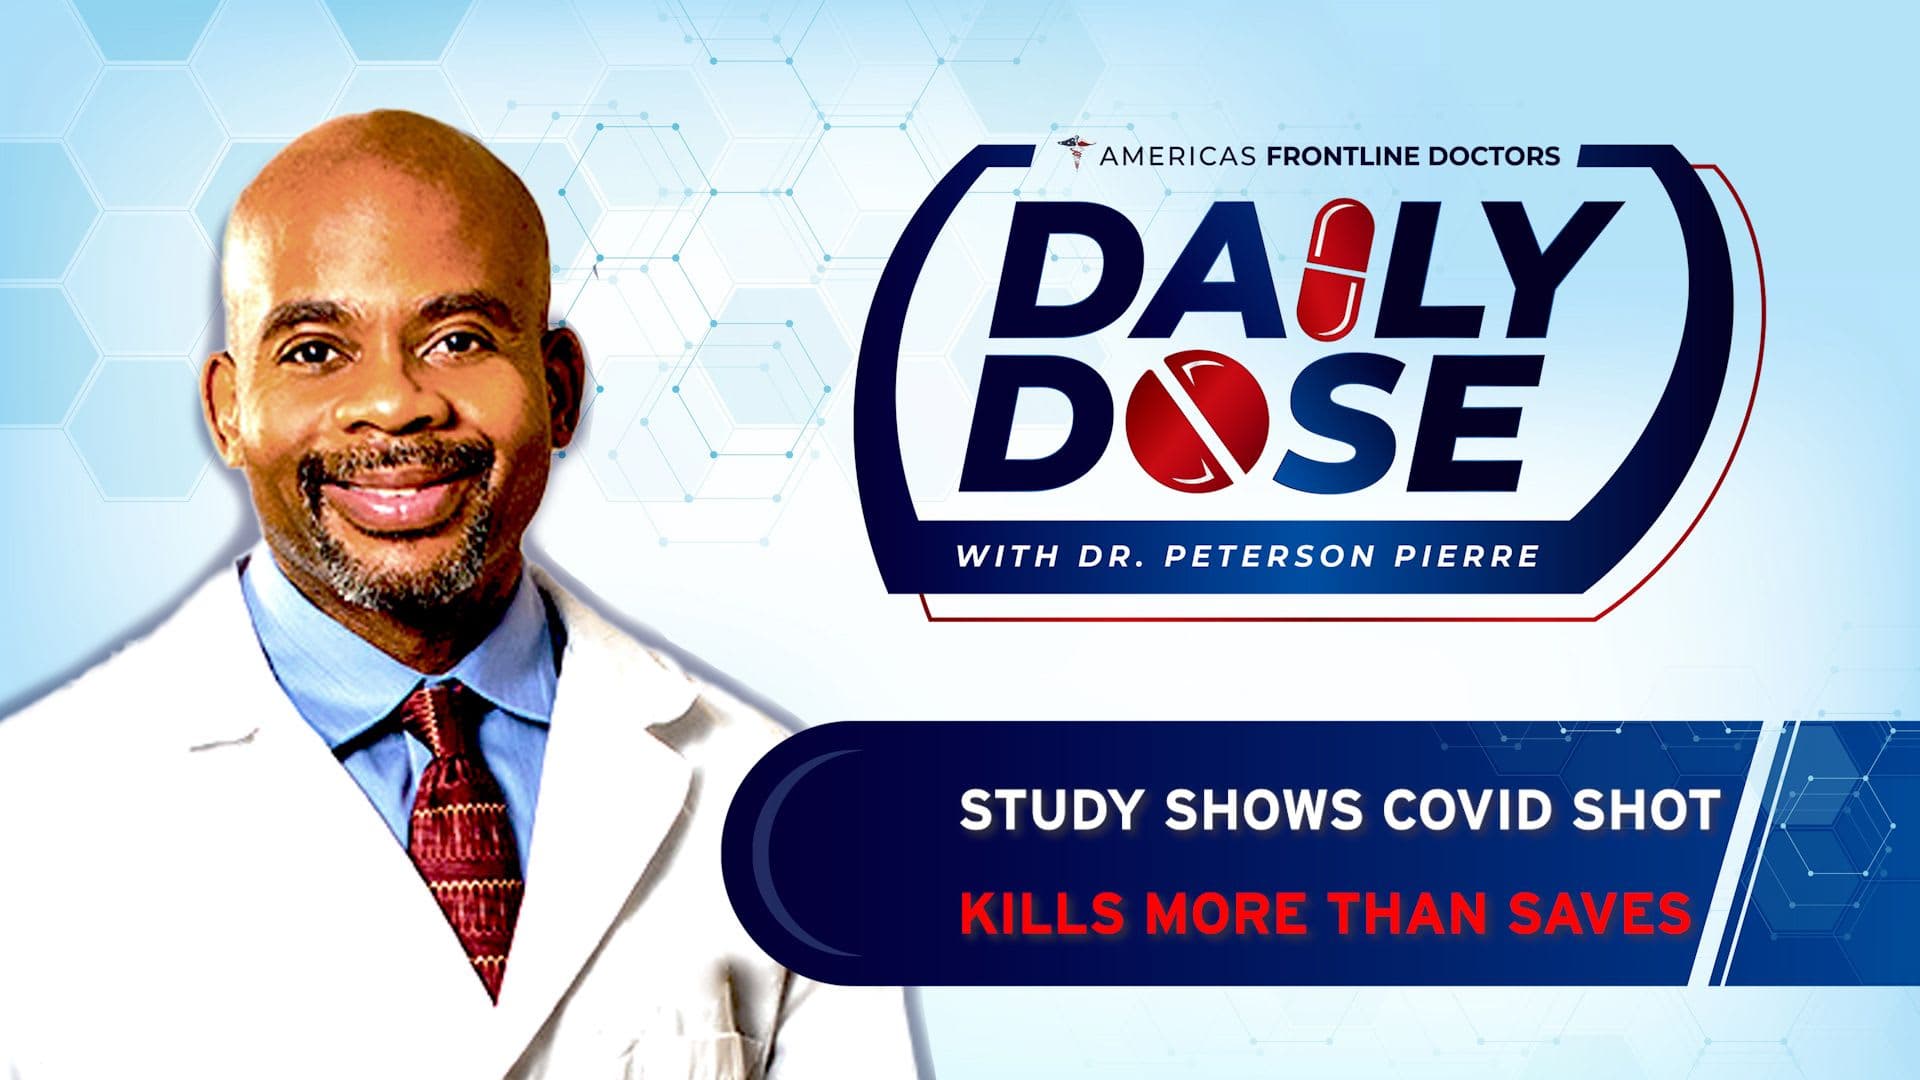 Daily Dose: 'Study Shows COVID Shot Kill More Than Saves' with Dr. Peterson Pierre